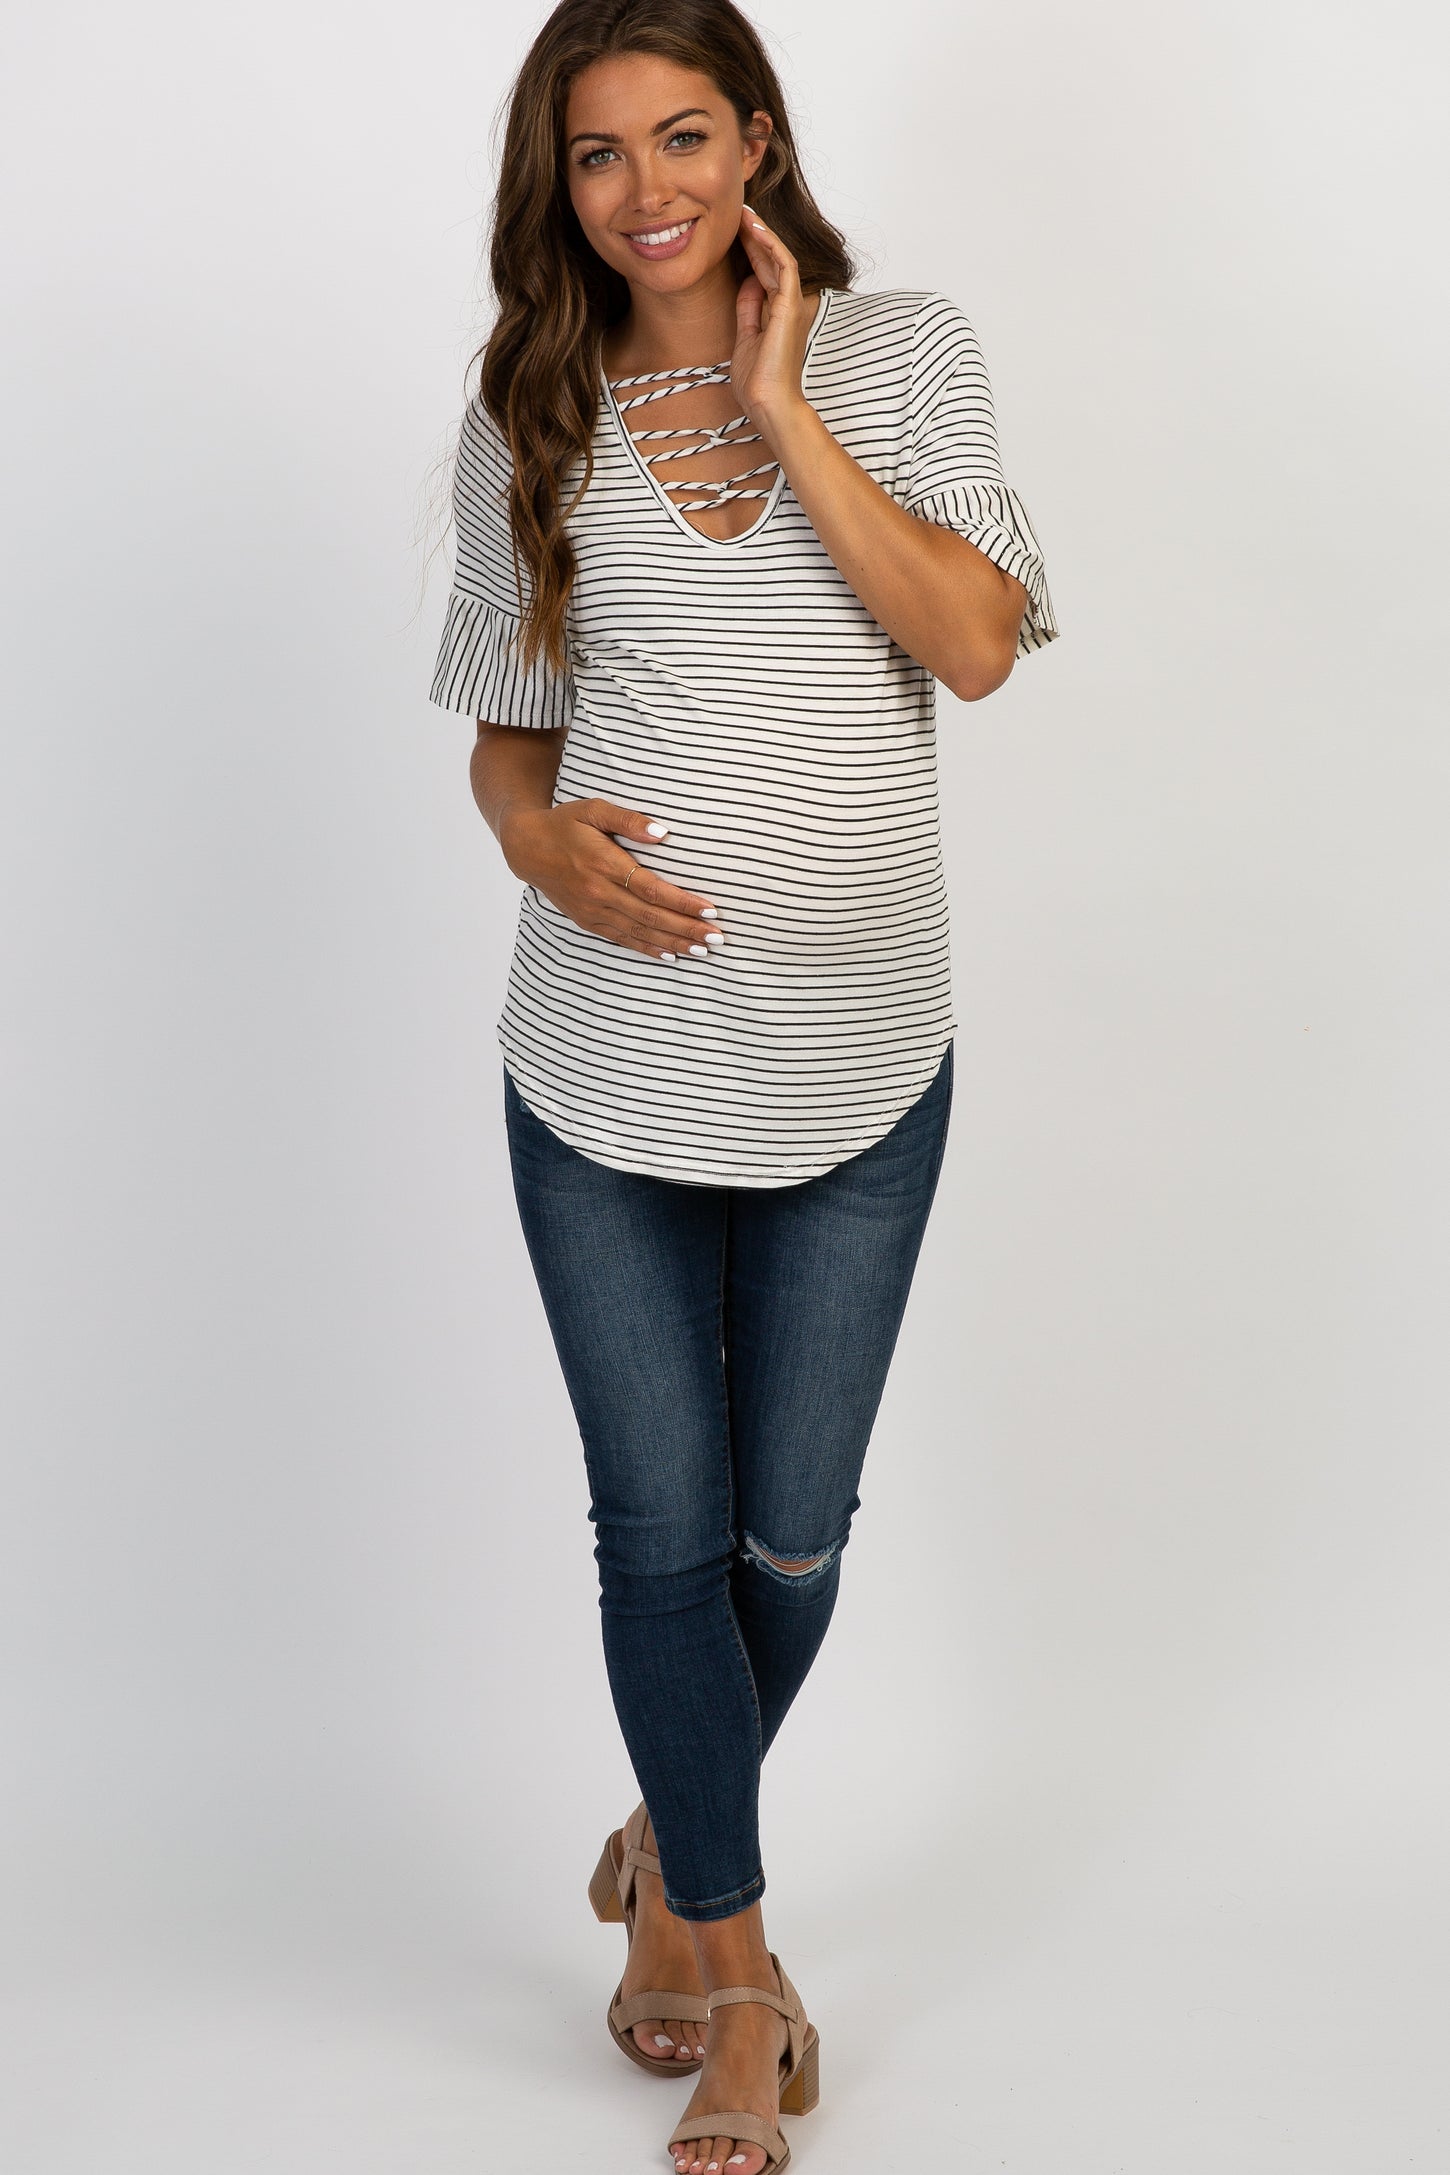 Ivory Striped Caged Crisscross Maternity Top